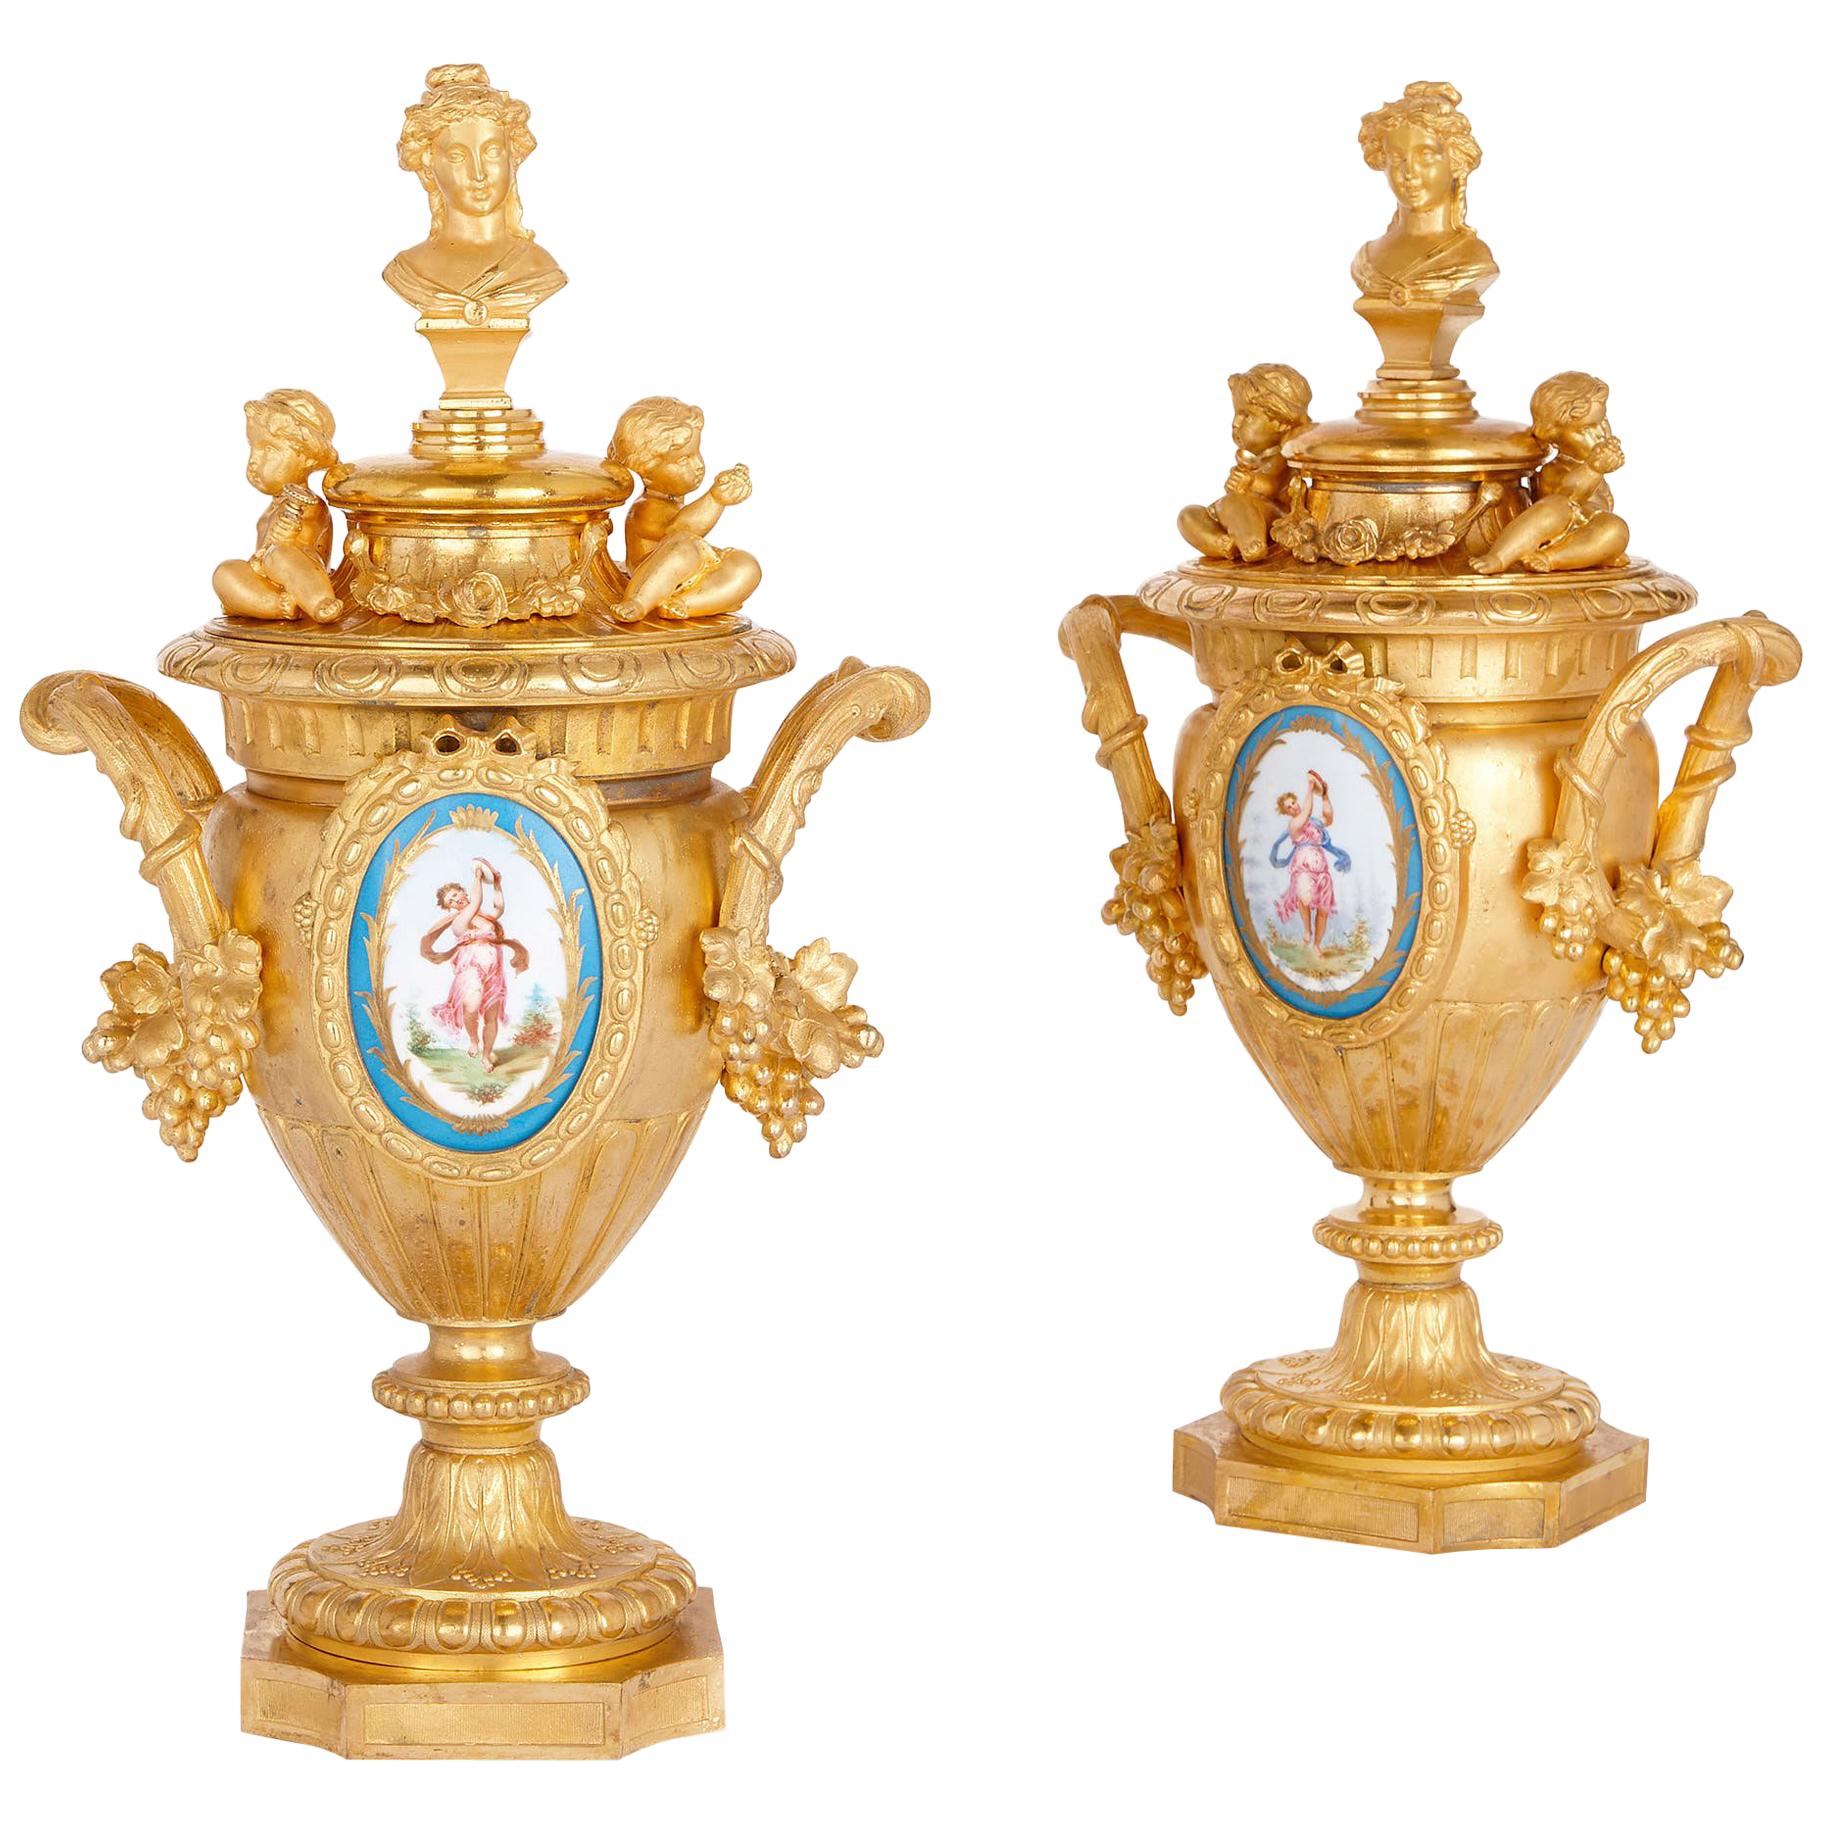 Two Sèvres Style Porcelain Mounted Gilt Metal Vases by Mourey